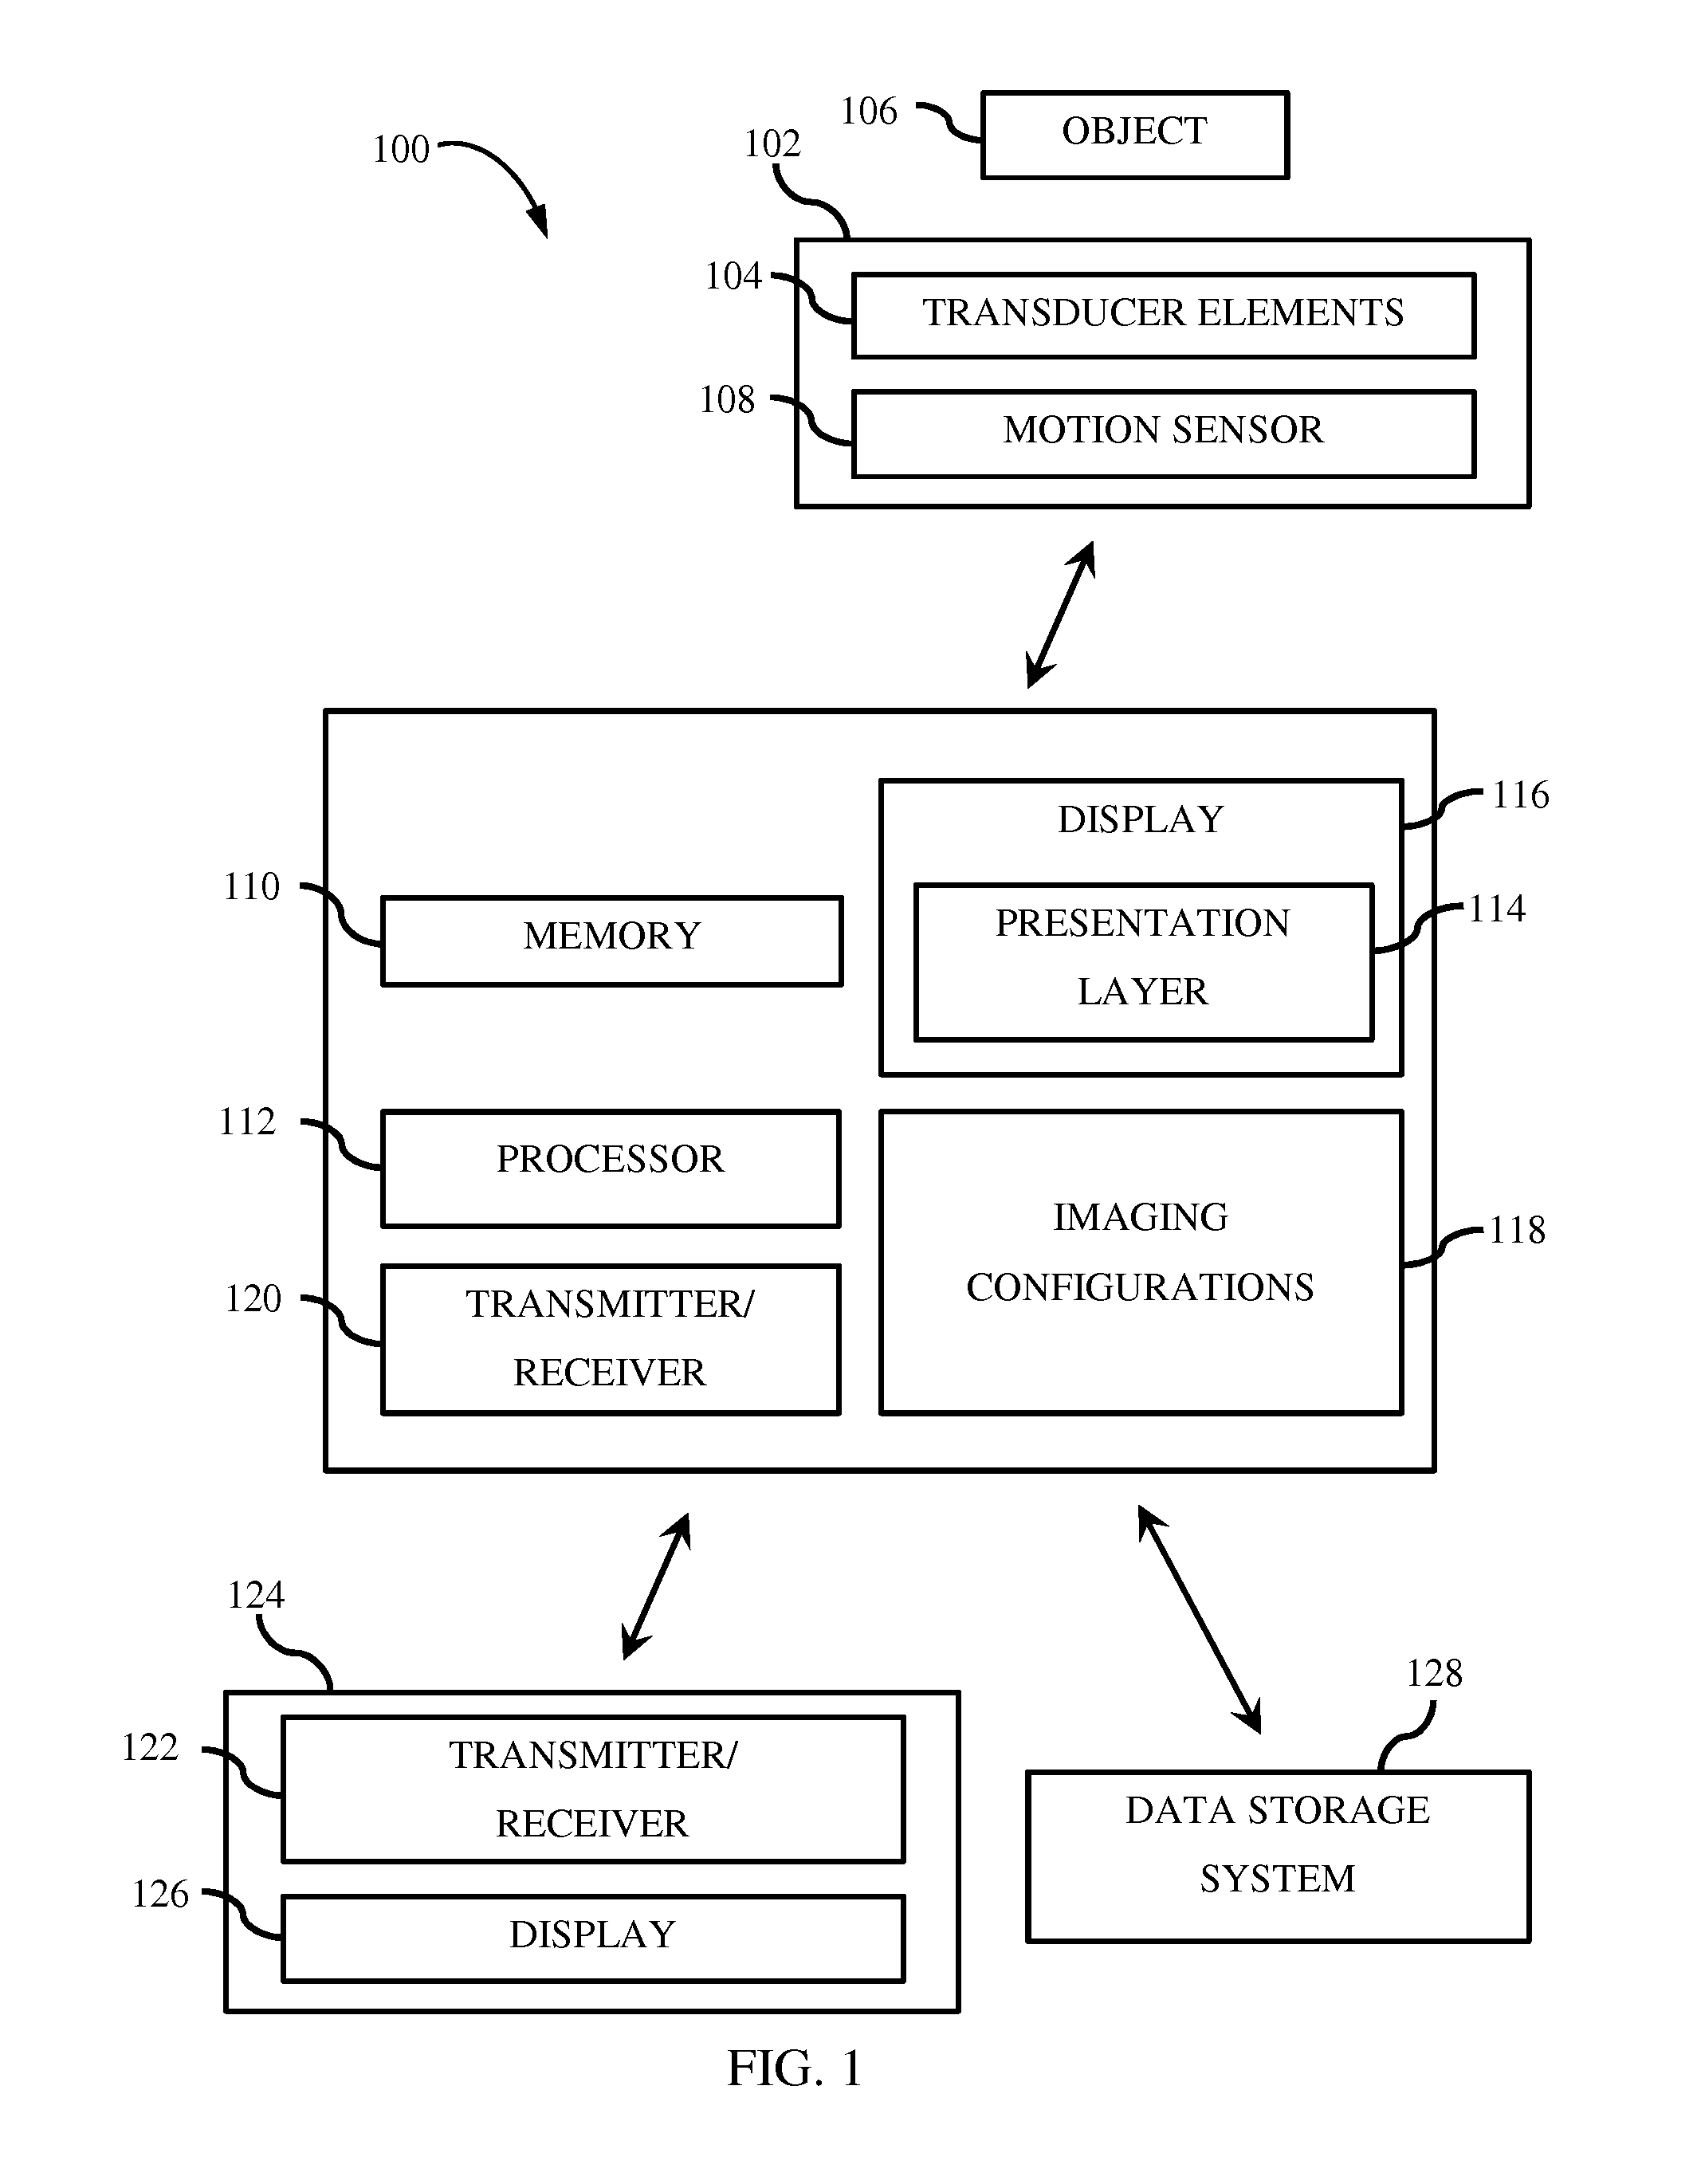 Medical imaging system and a portable medical imaging device for performing imaging